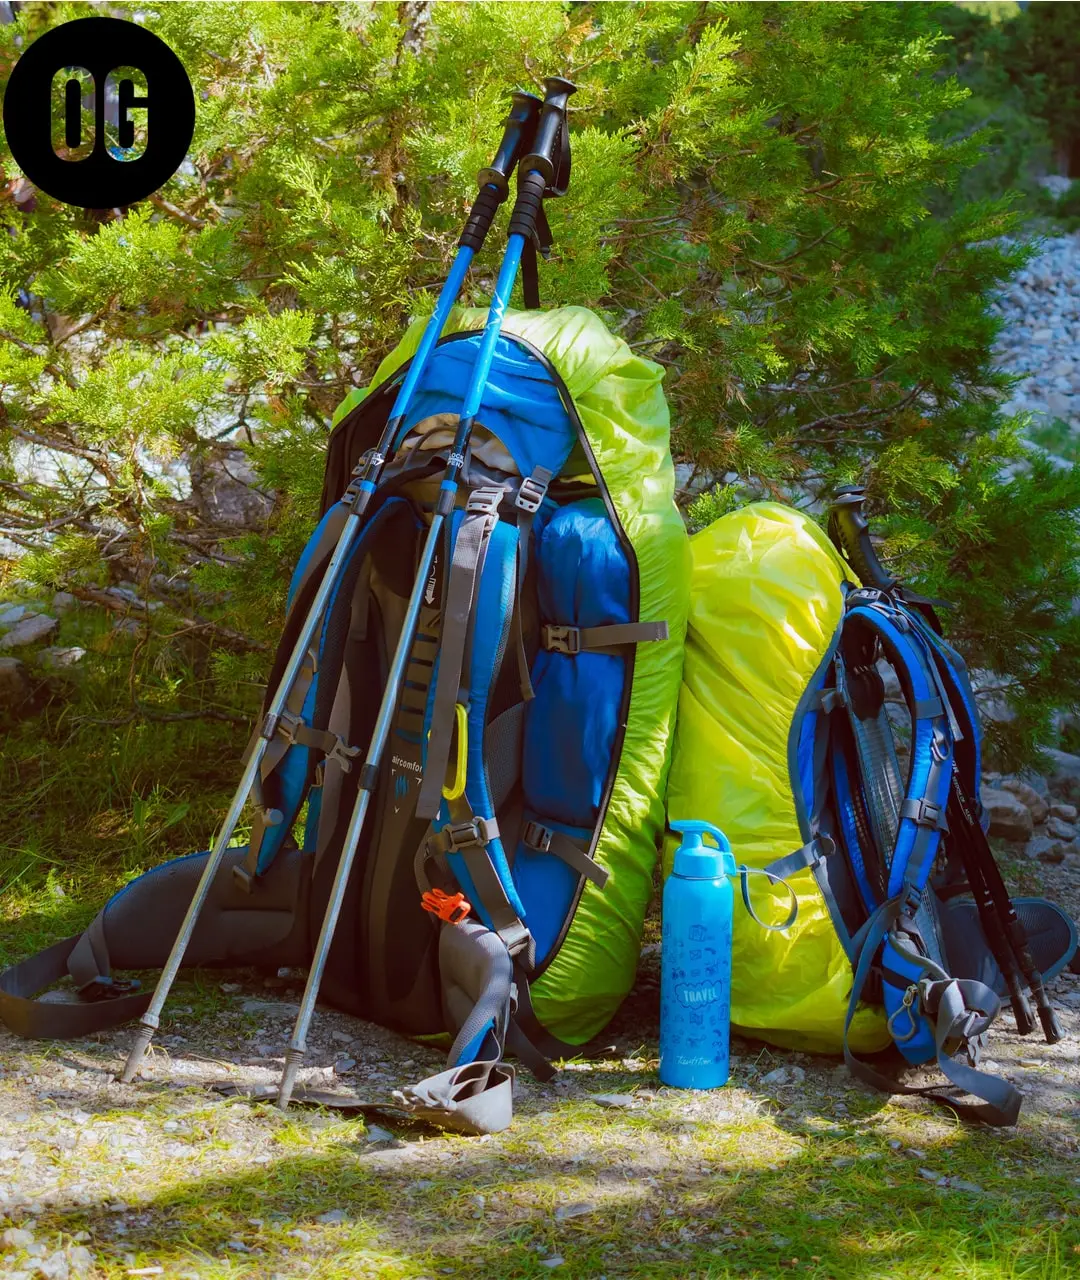 Essential Gear for Overnight Camping
